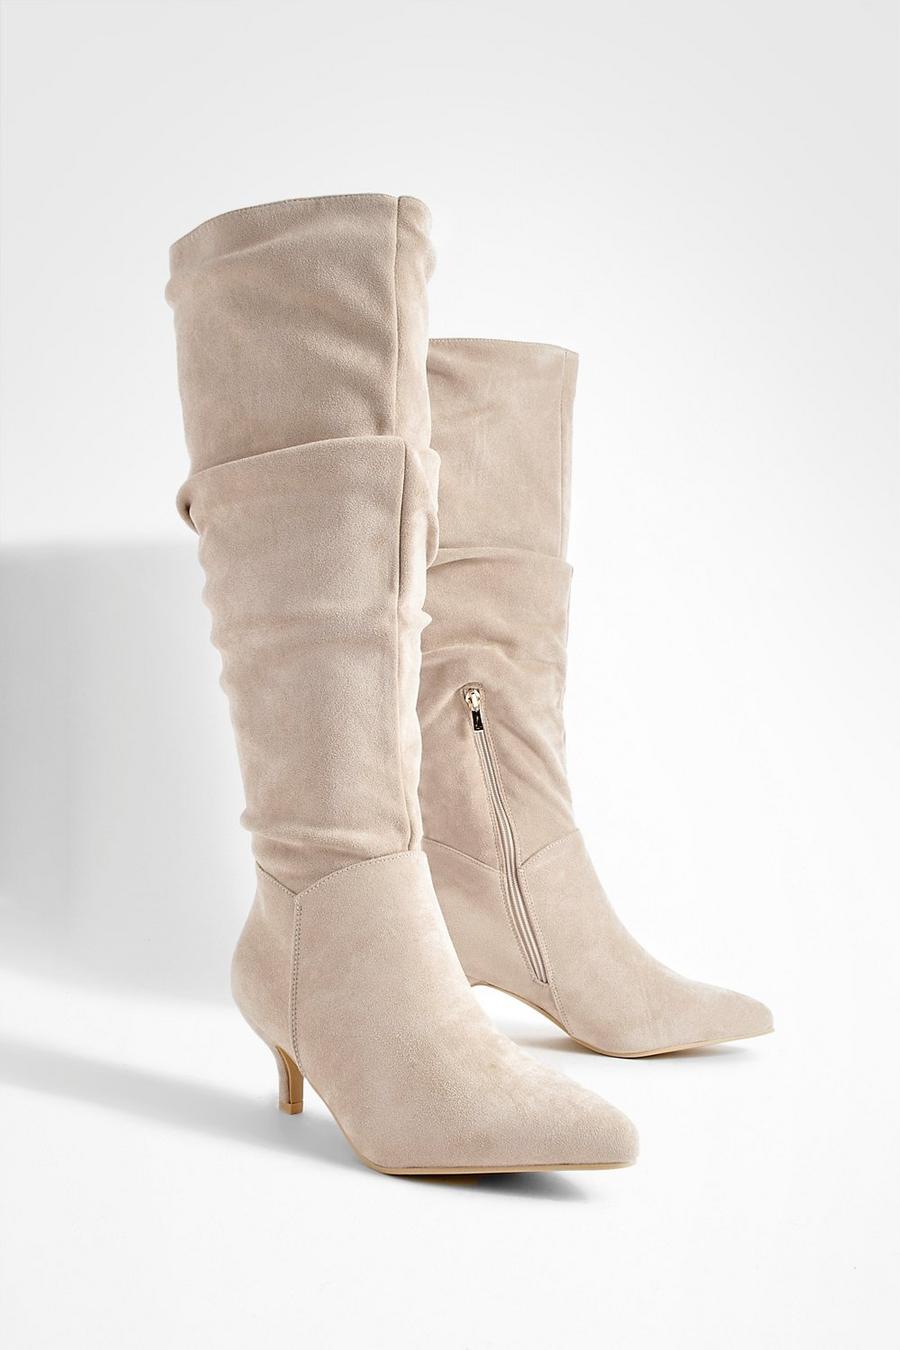 Low Stiletto Knee High Slouchy Boots | boohoo